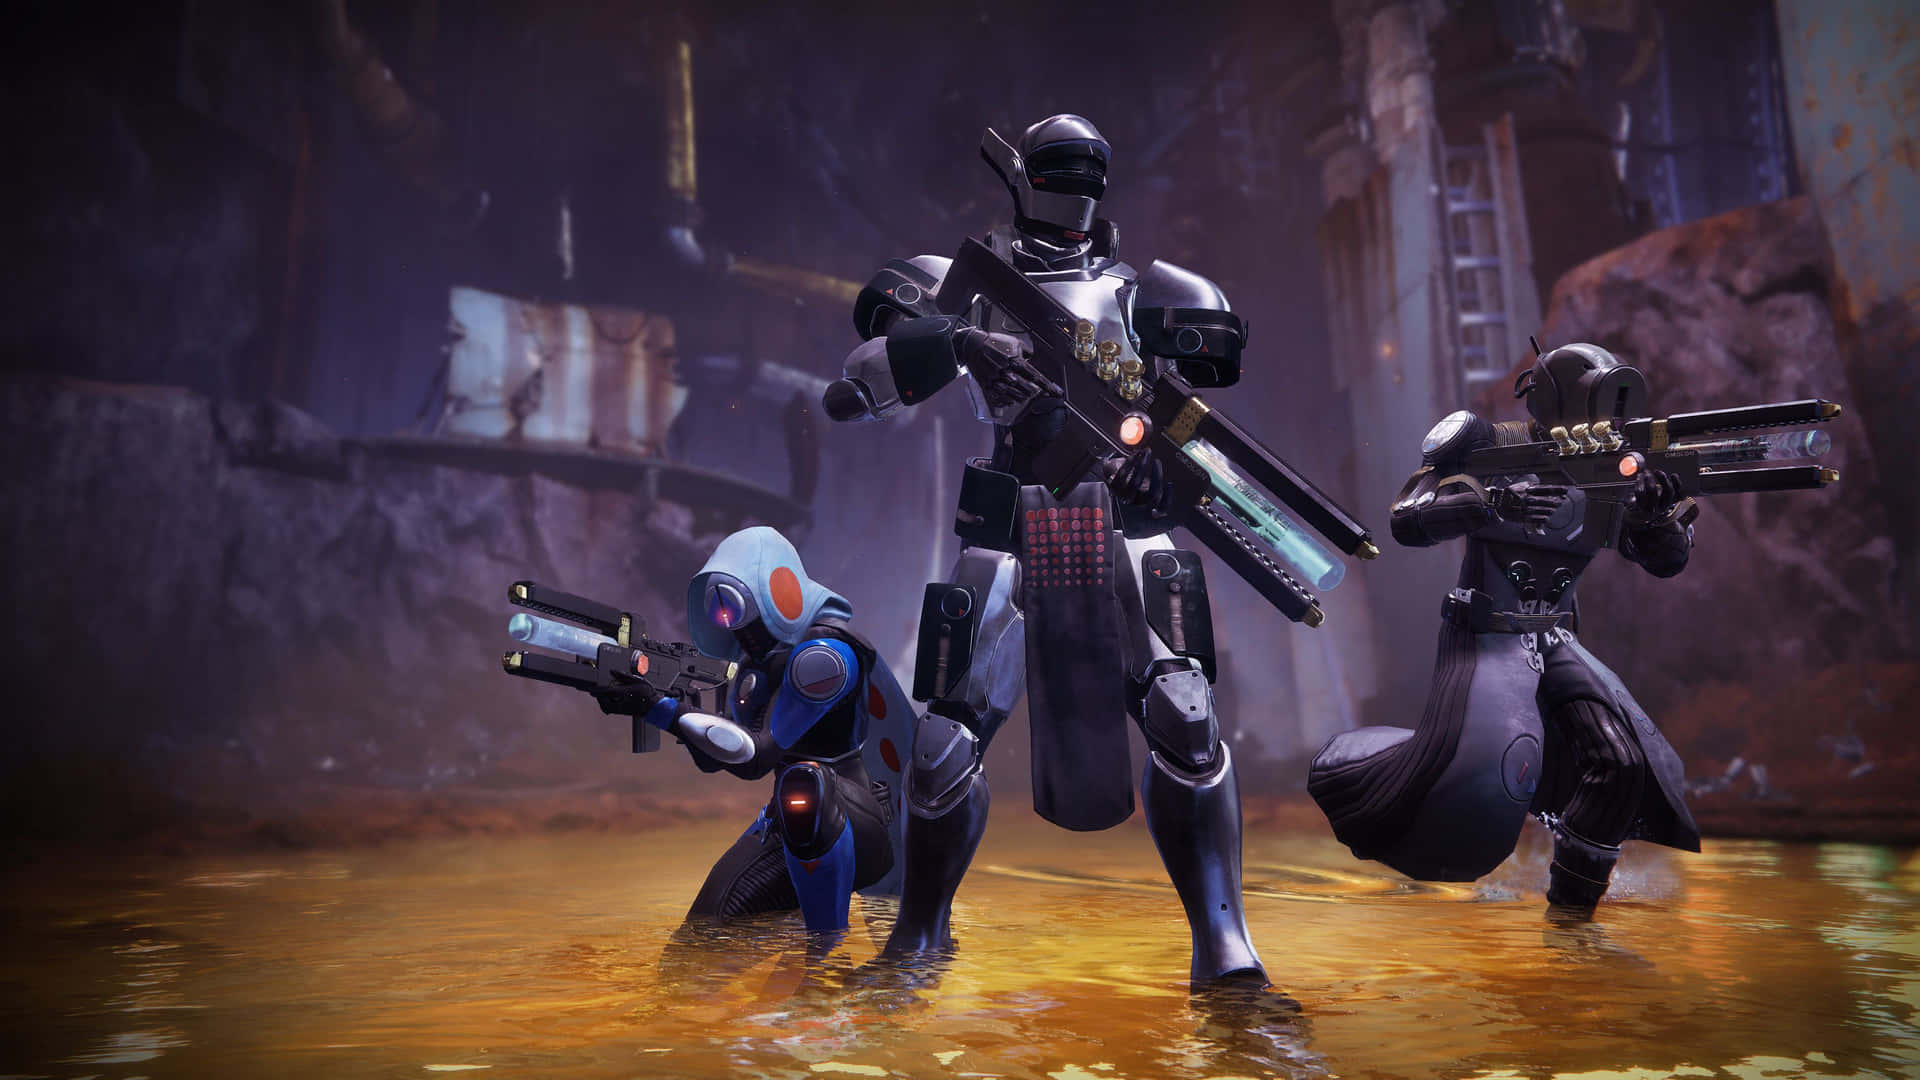 An epic world awaits in the sequel to the major hit video game, Destiny 2